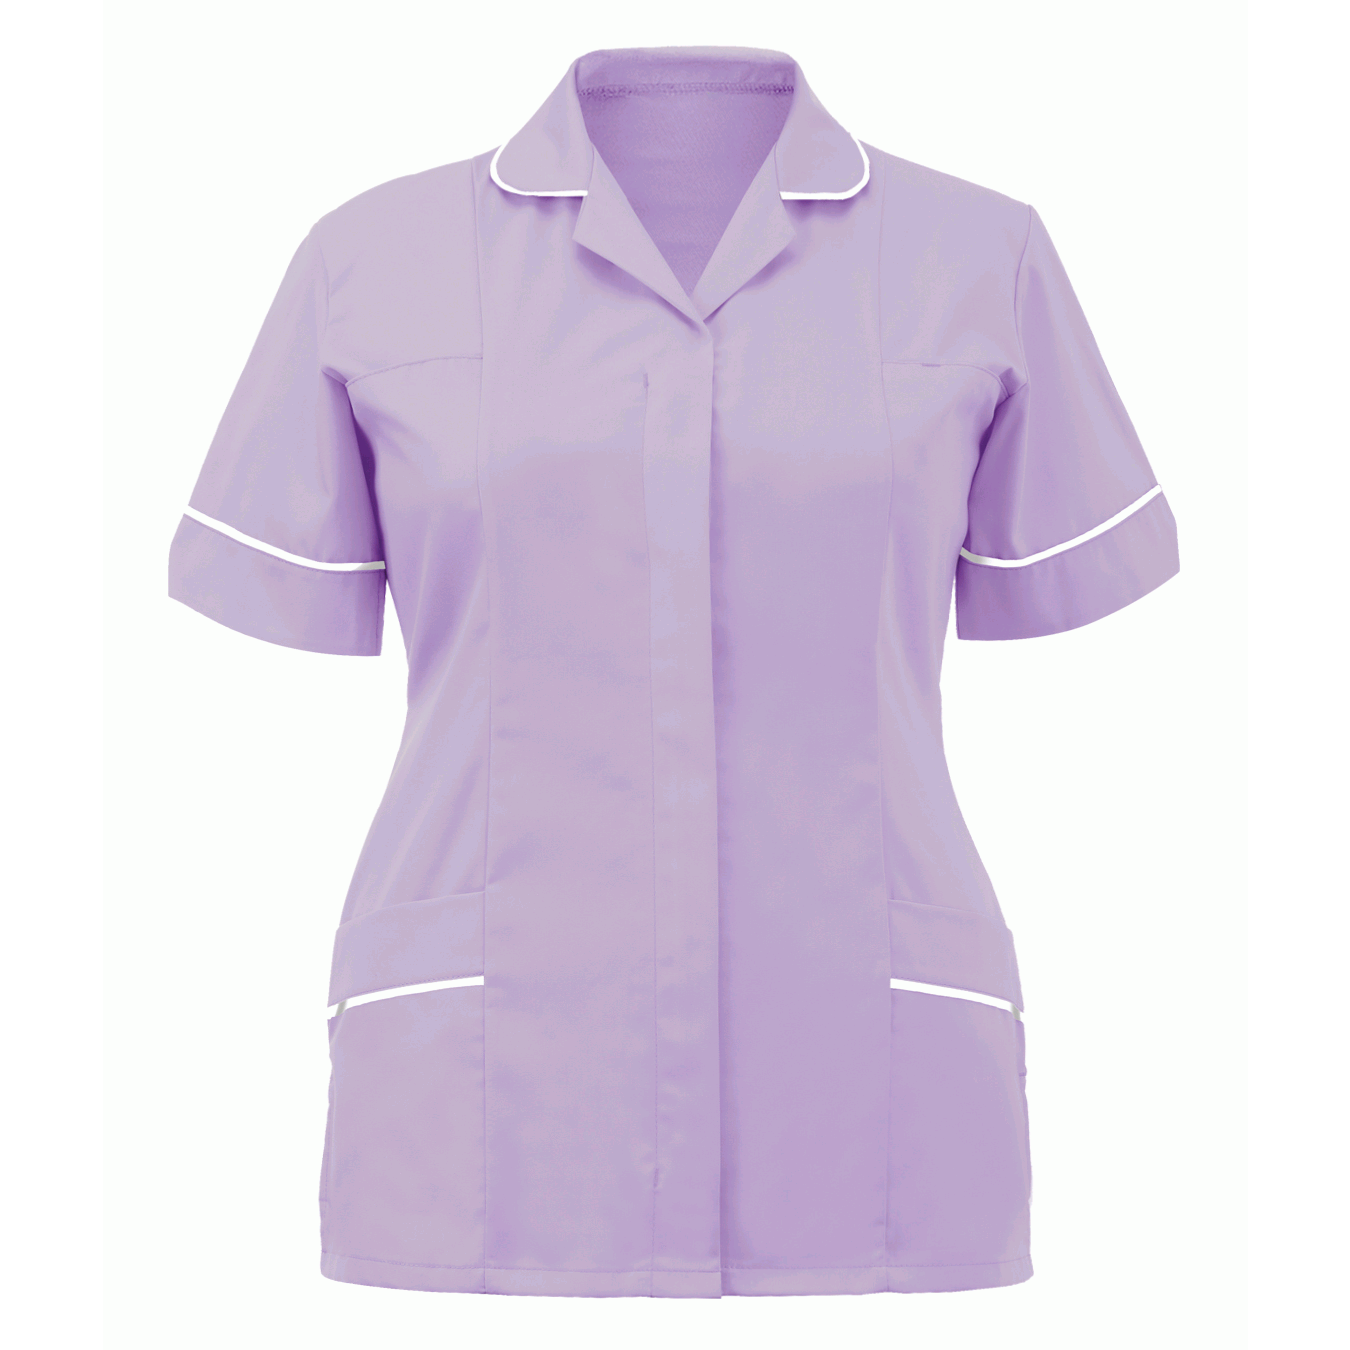 CLASSIC TUNIC: LADIES - LILAC AND WHITE